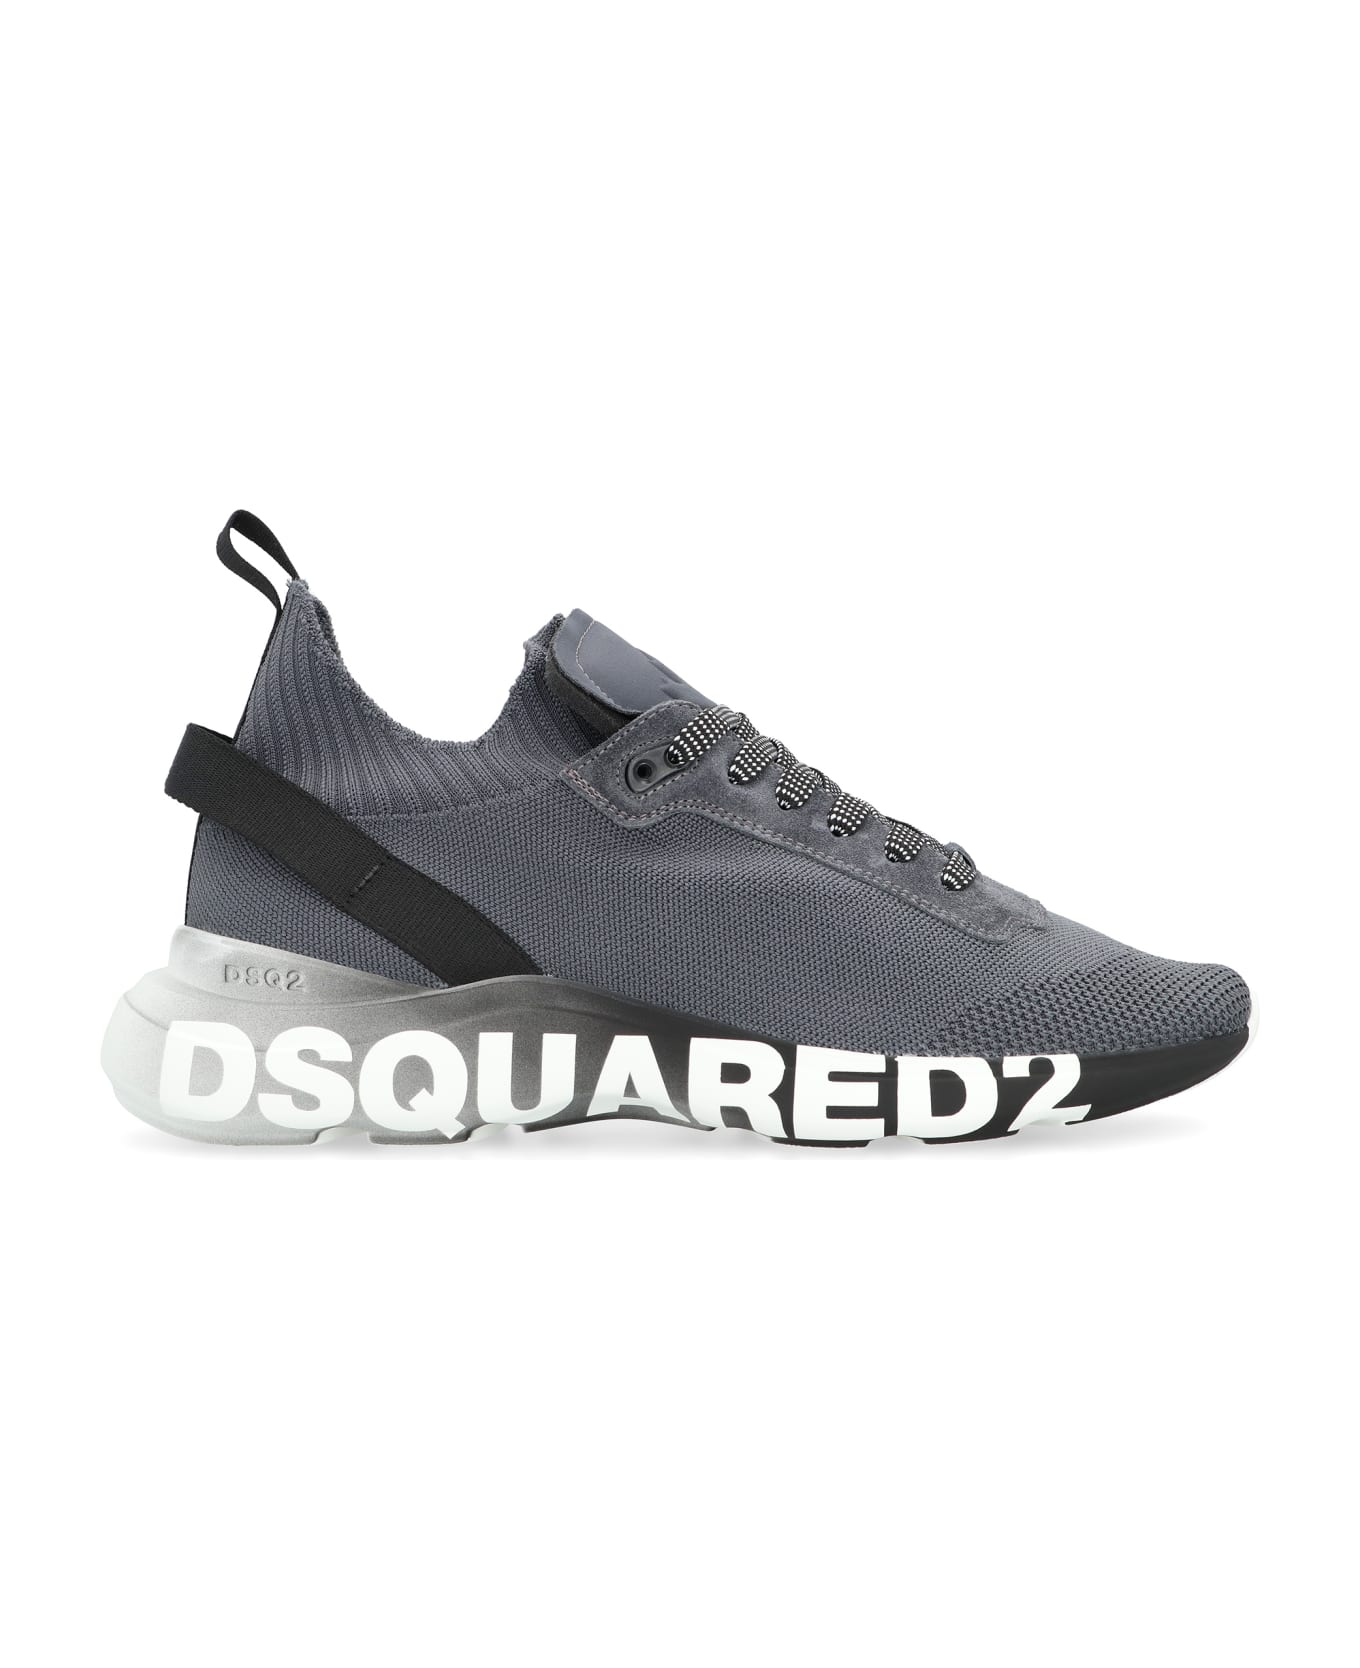 Dsquared2 Fly Knitted Sock-style Sneakers - grey スニーカー